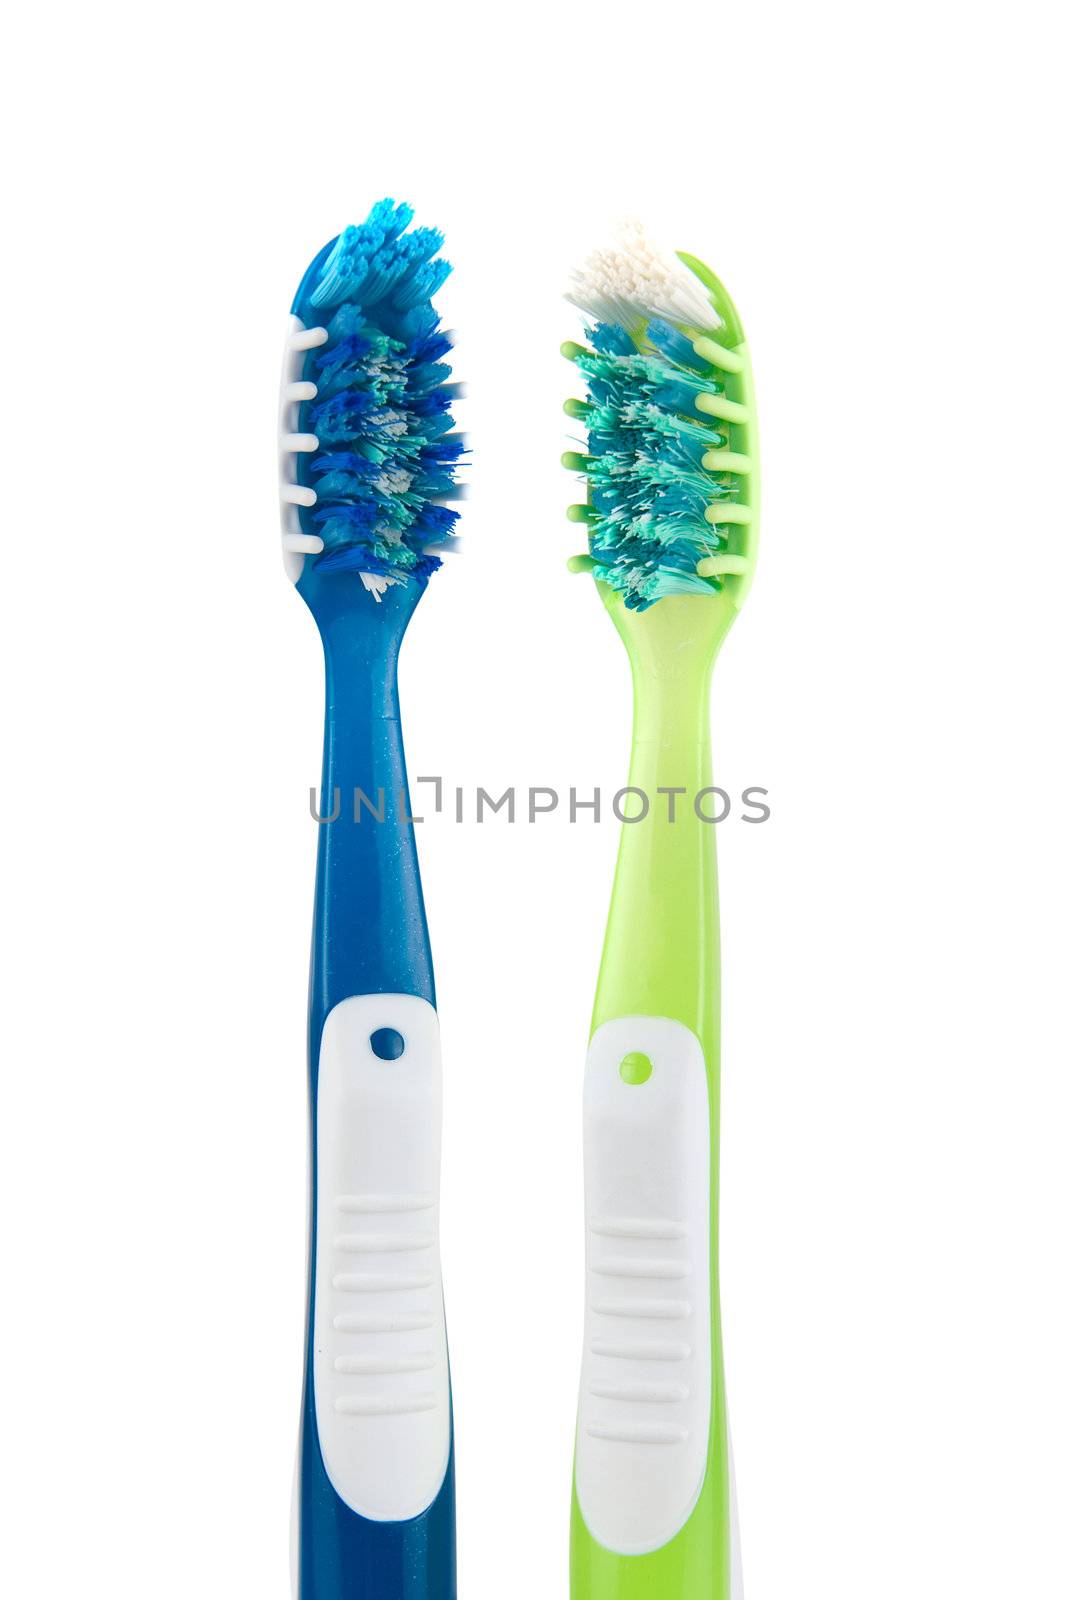  Two Toothbrushes by rusak